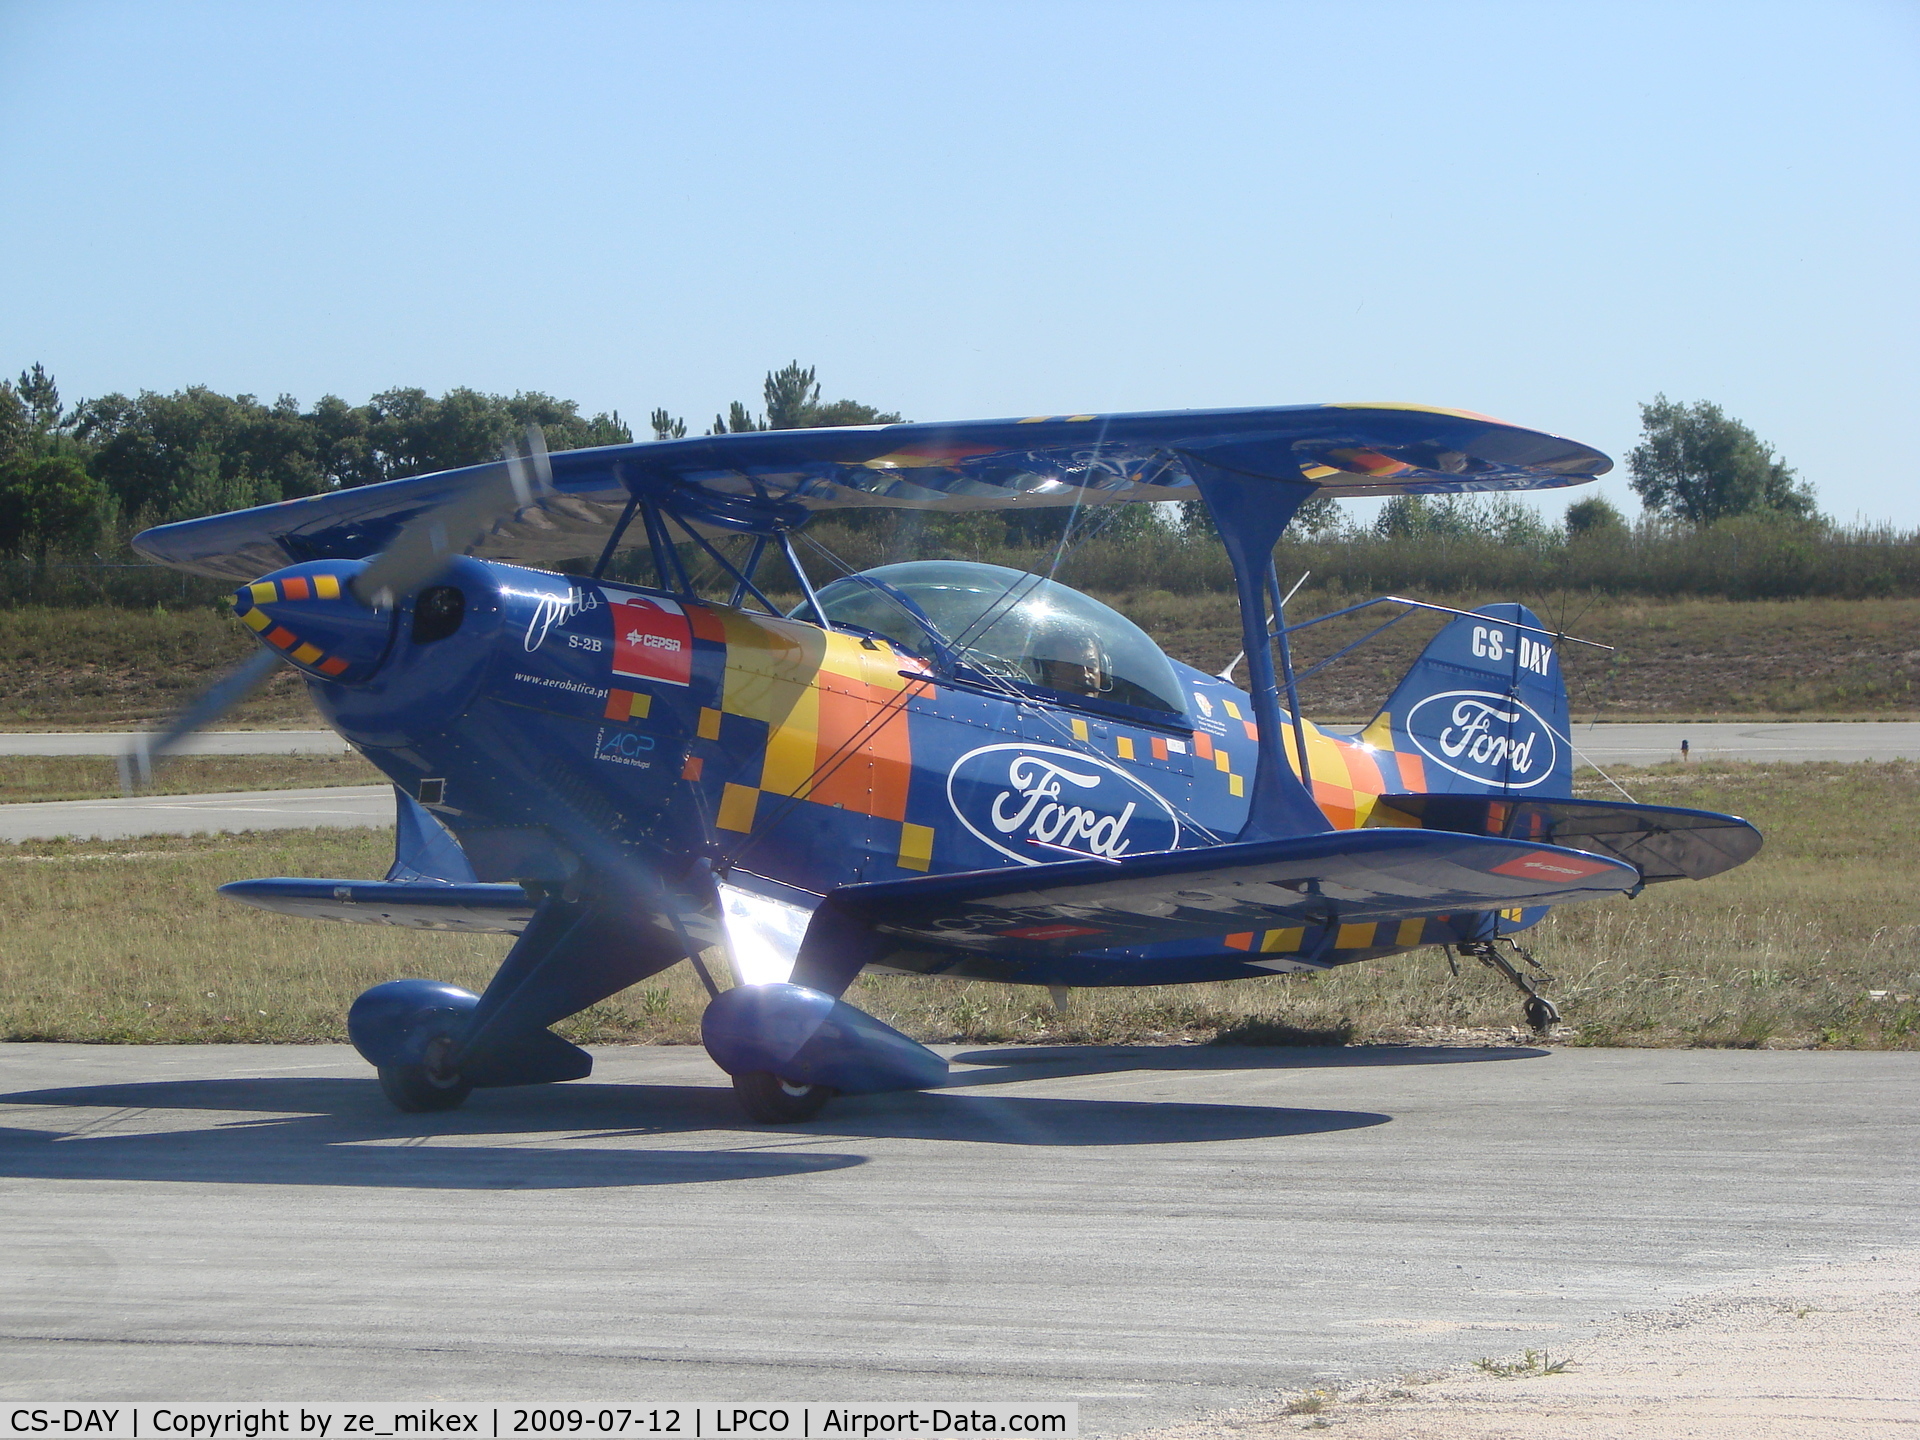 CS-DAY, 1992 Pitts S-2B Special C/N 5282, Pitts special from aerobatica team at Coimbra air festival 09